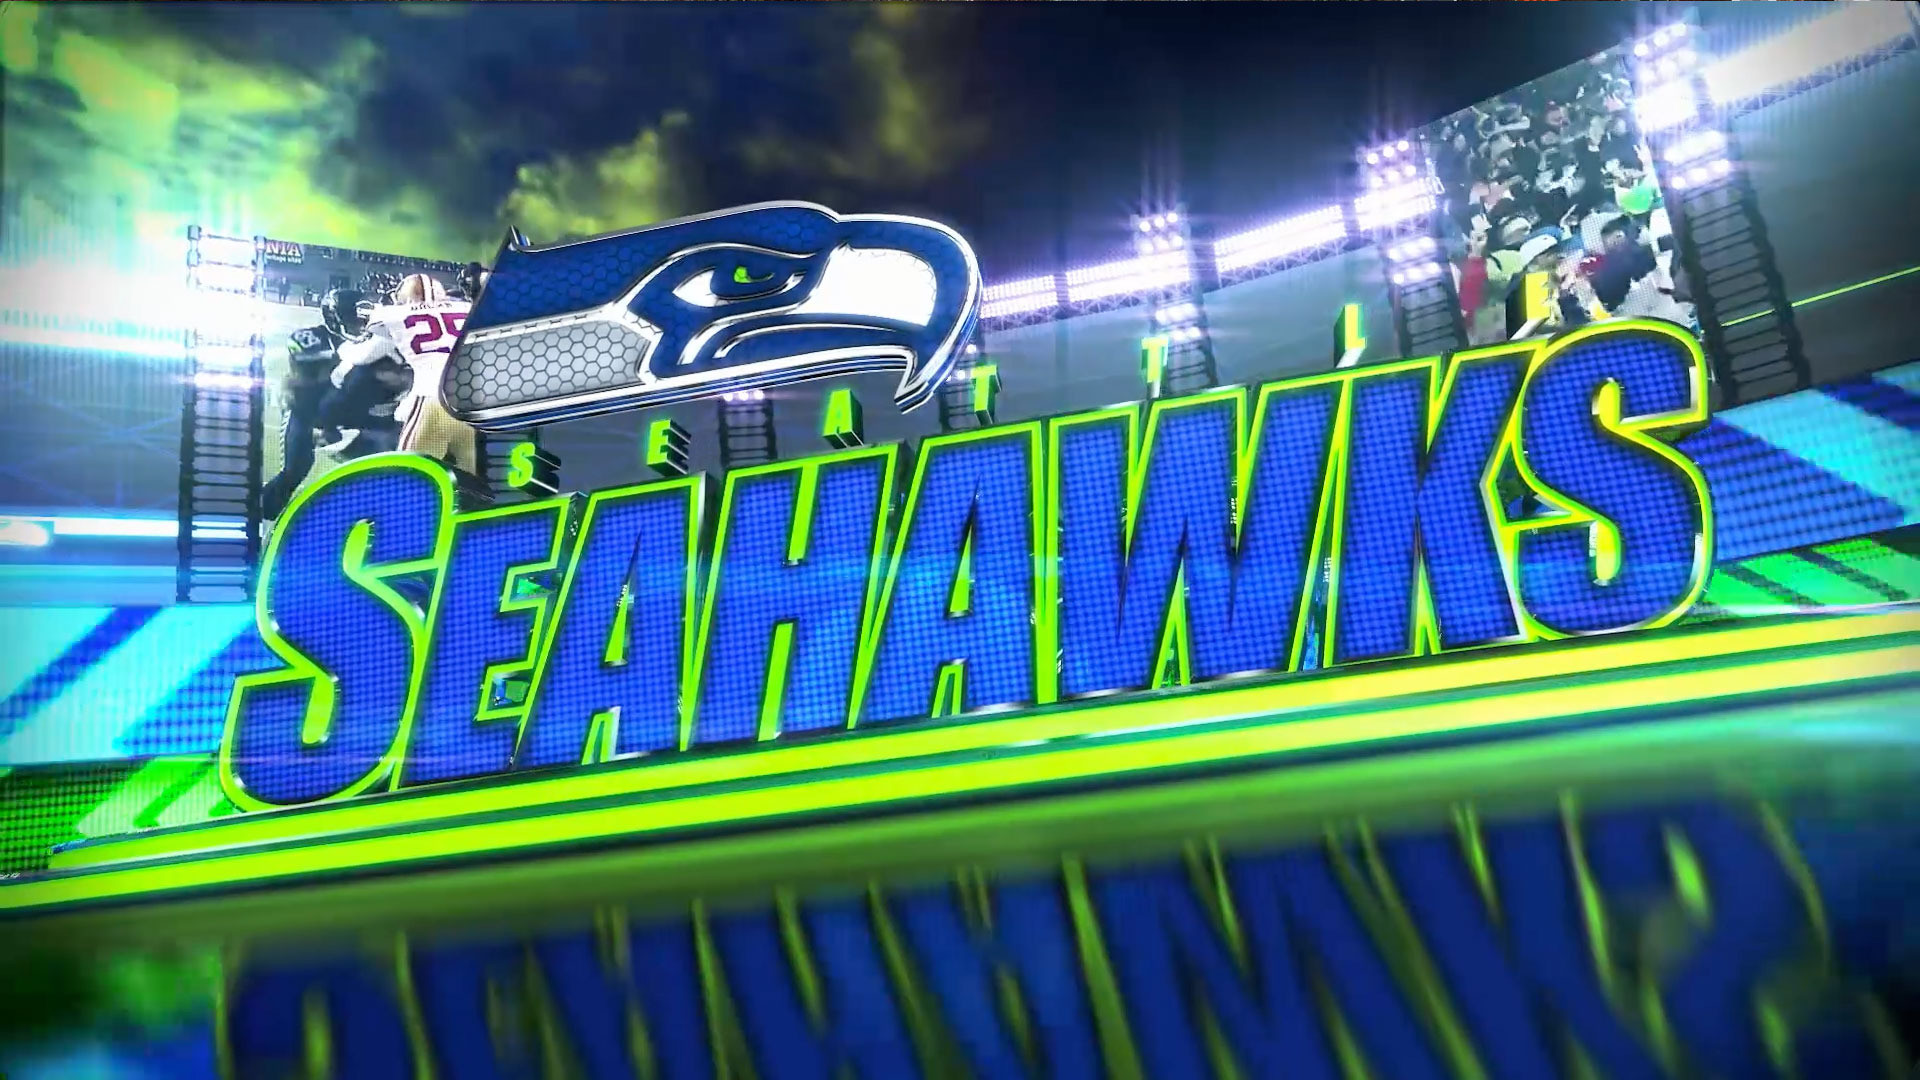 1920x1080 1000+ Images About Seattle Seahawks On Pinterest | IPhone .